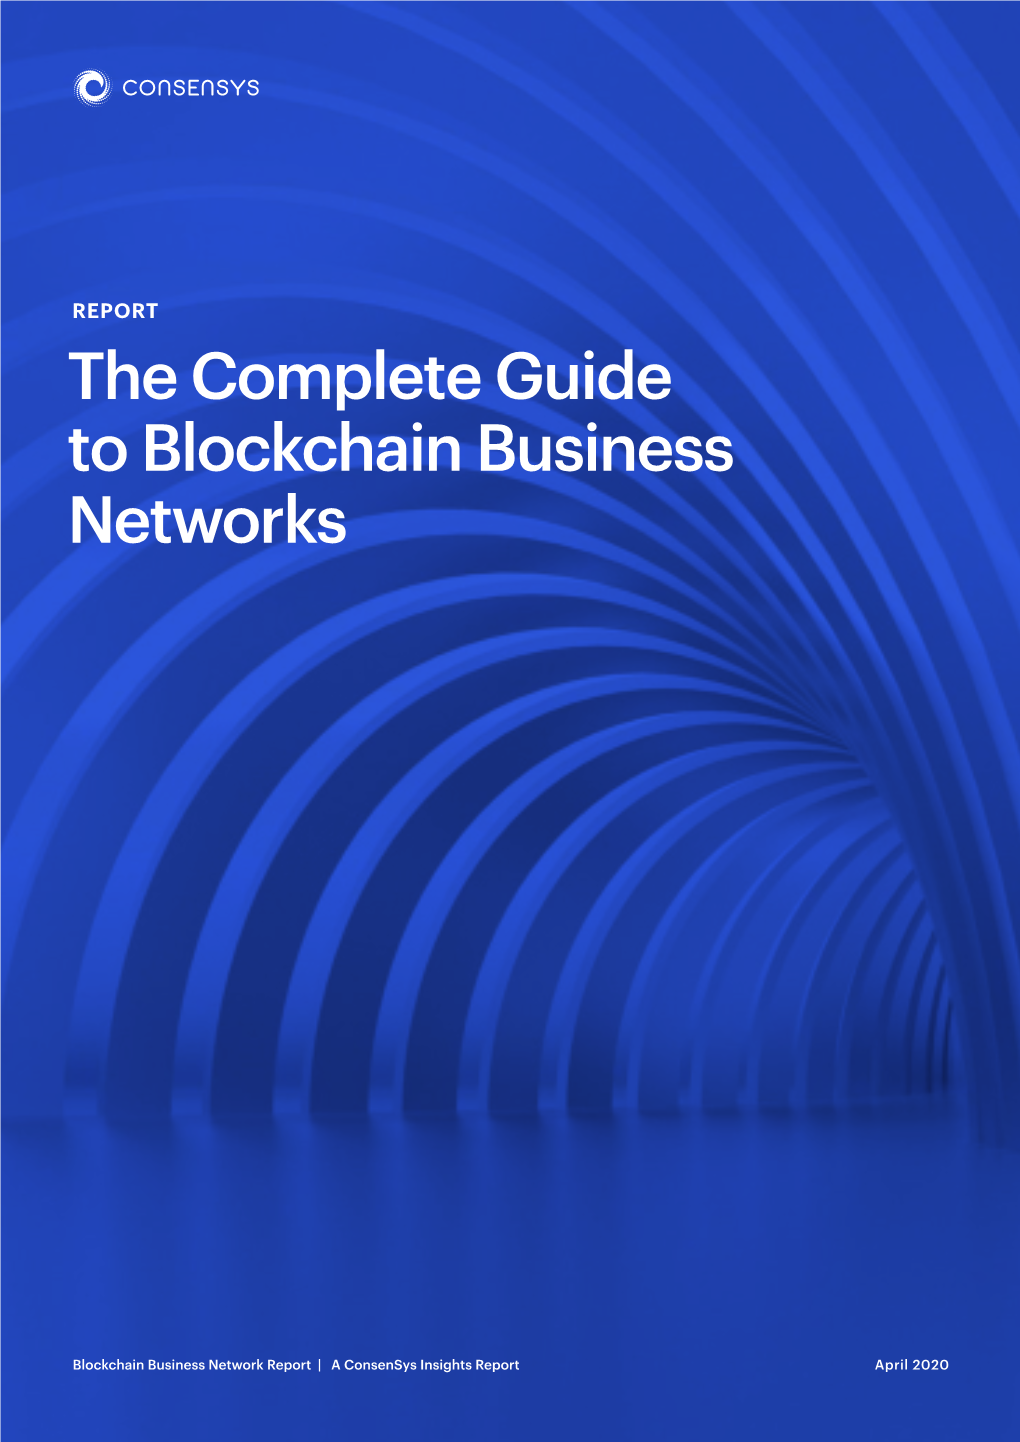 The Complete Guide to Blockchain Business Networks